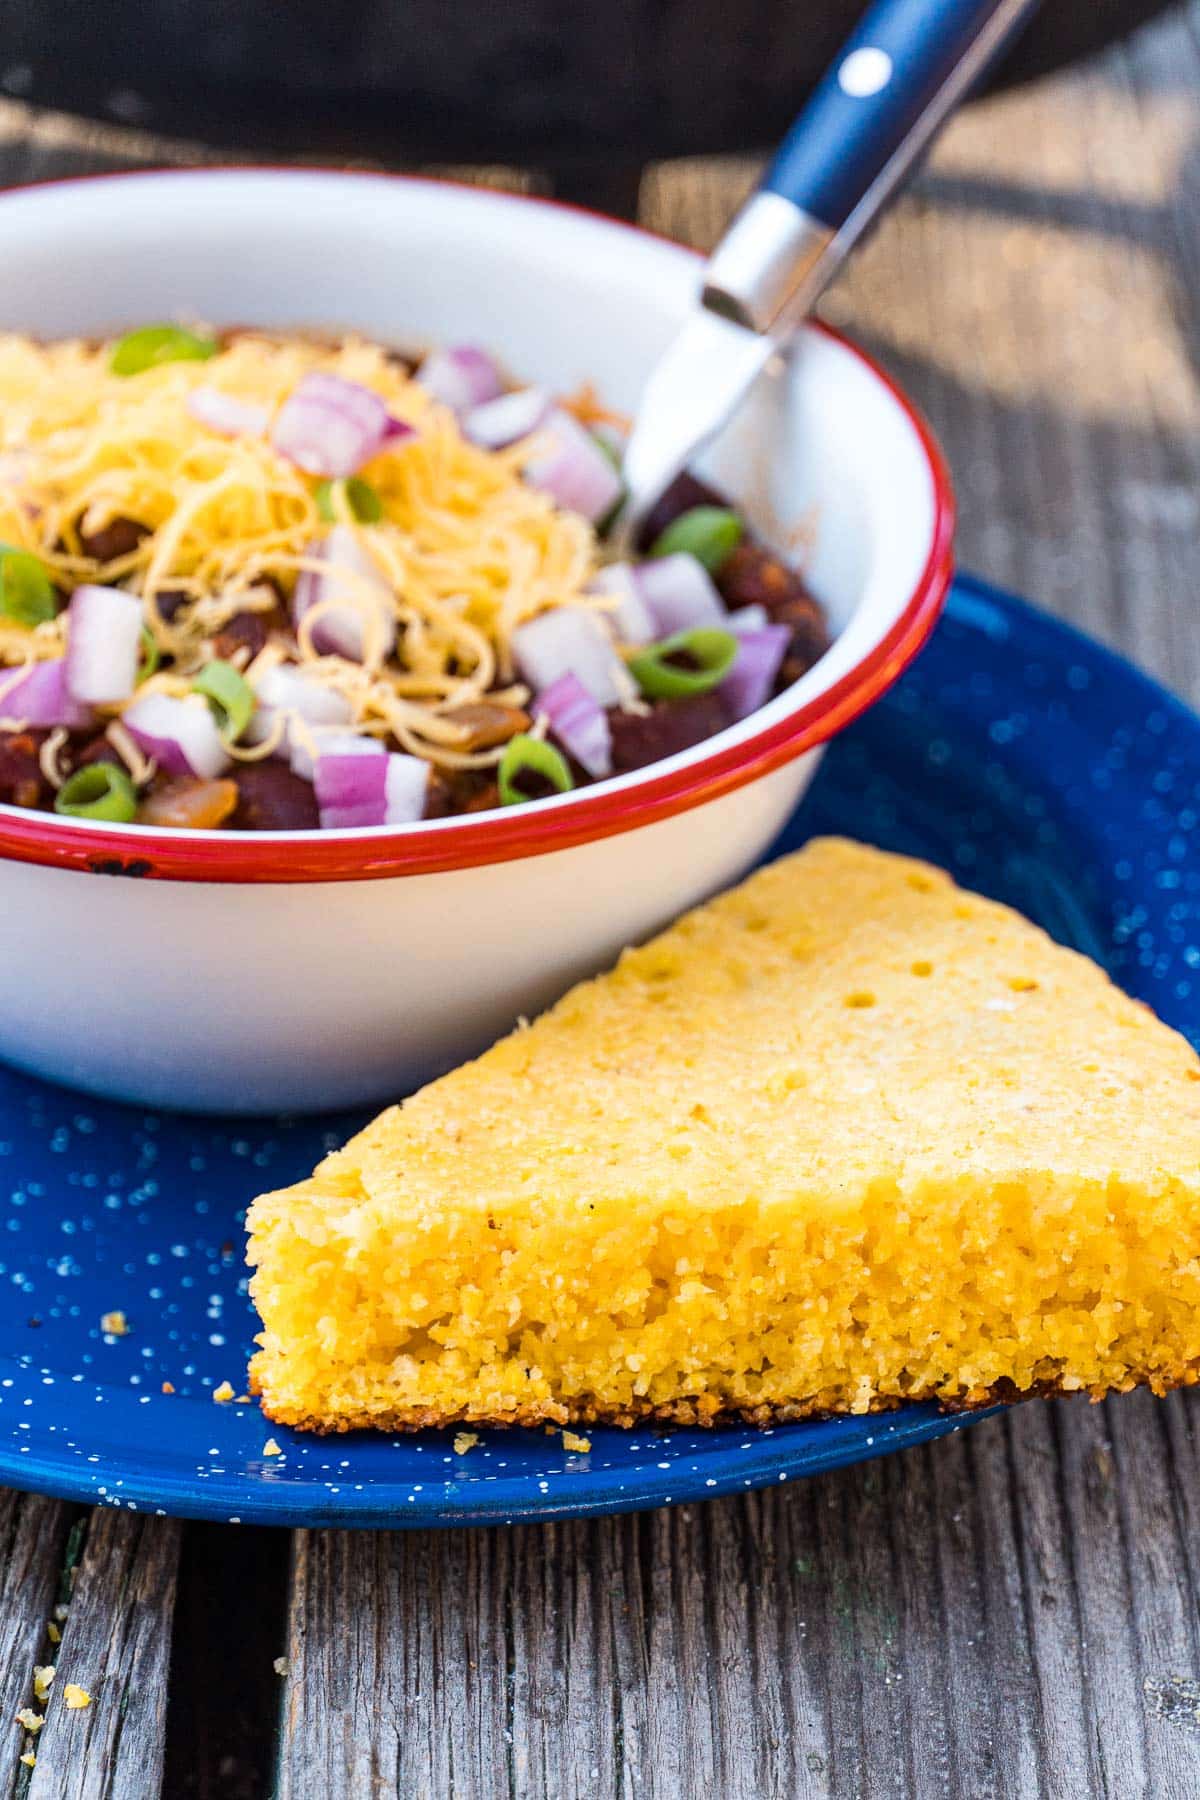 A slice of cornbread on a plate with a bowl of chili